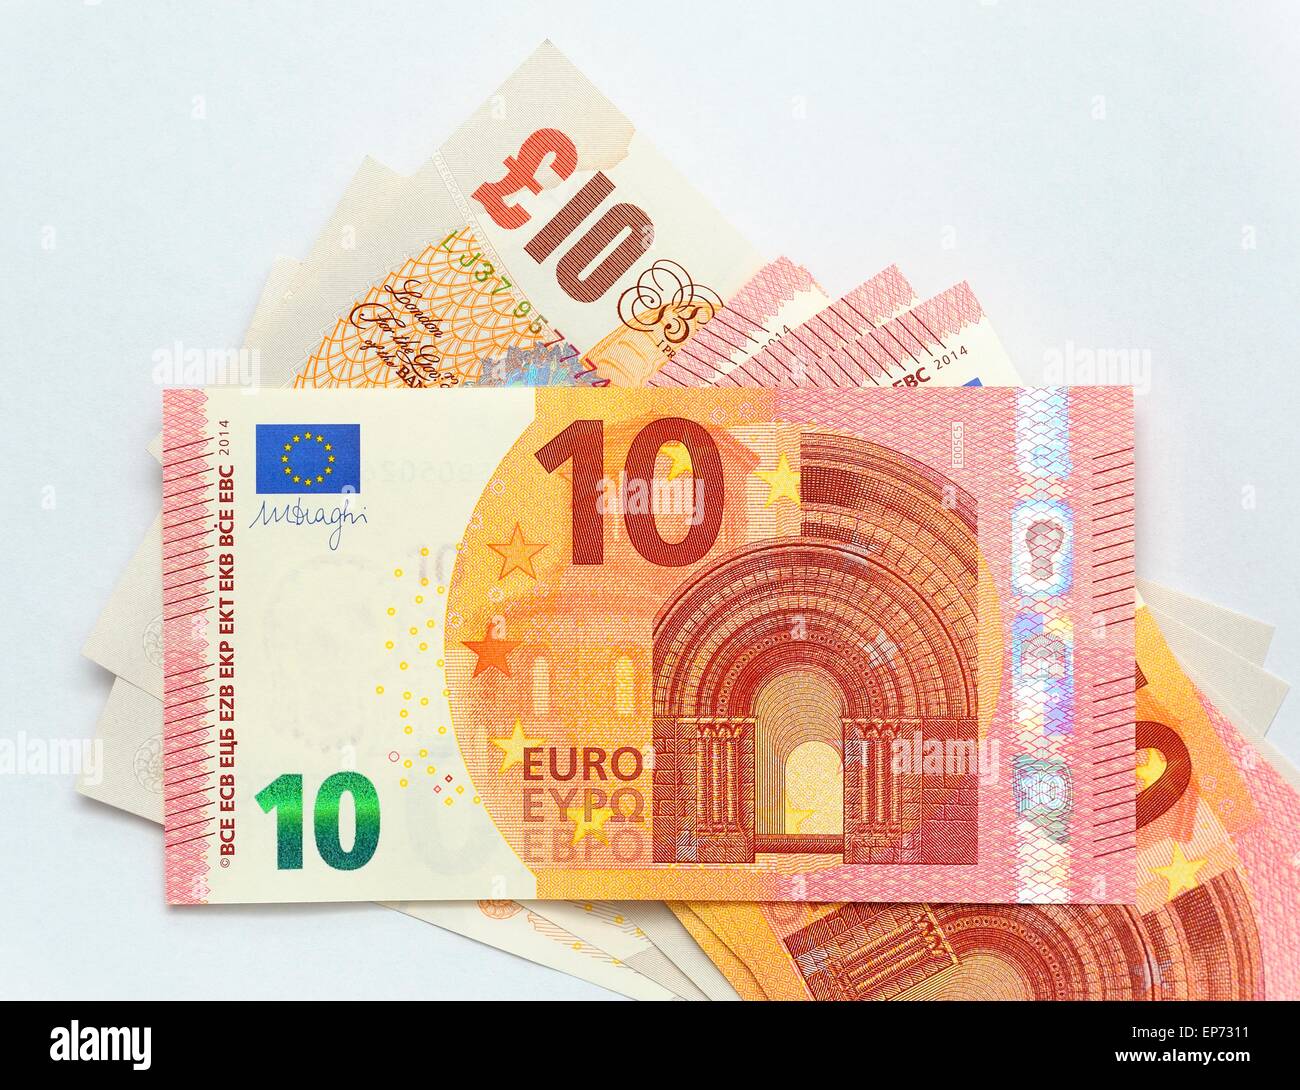 A British 10 pound note and a Euro 20 Note Stock Photo